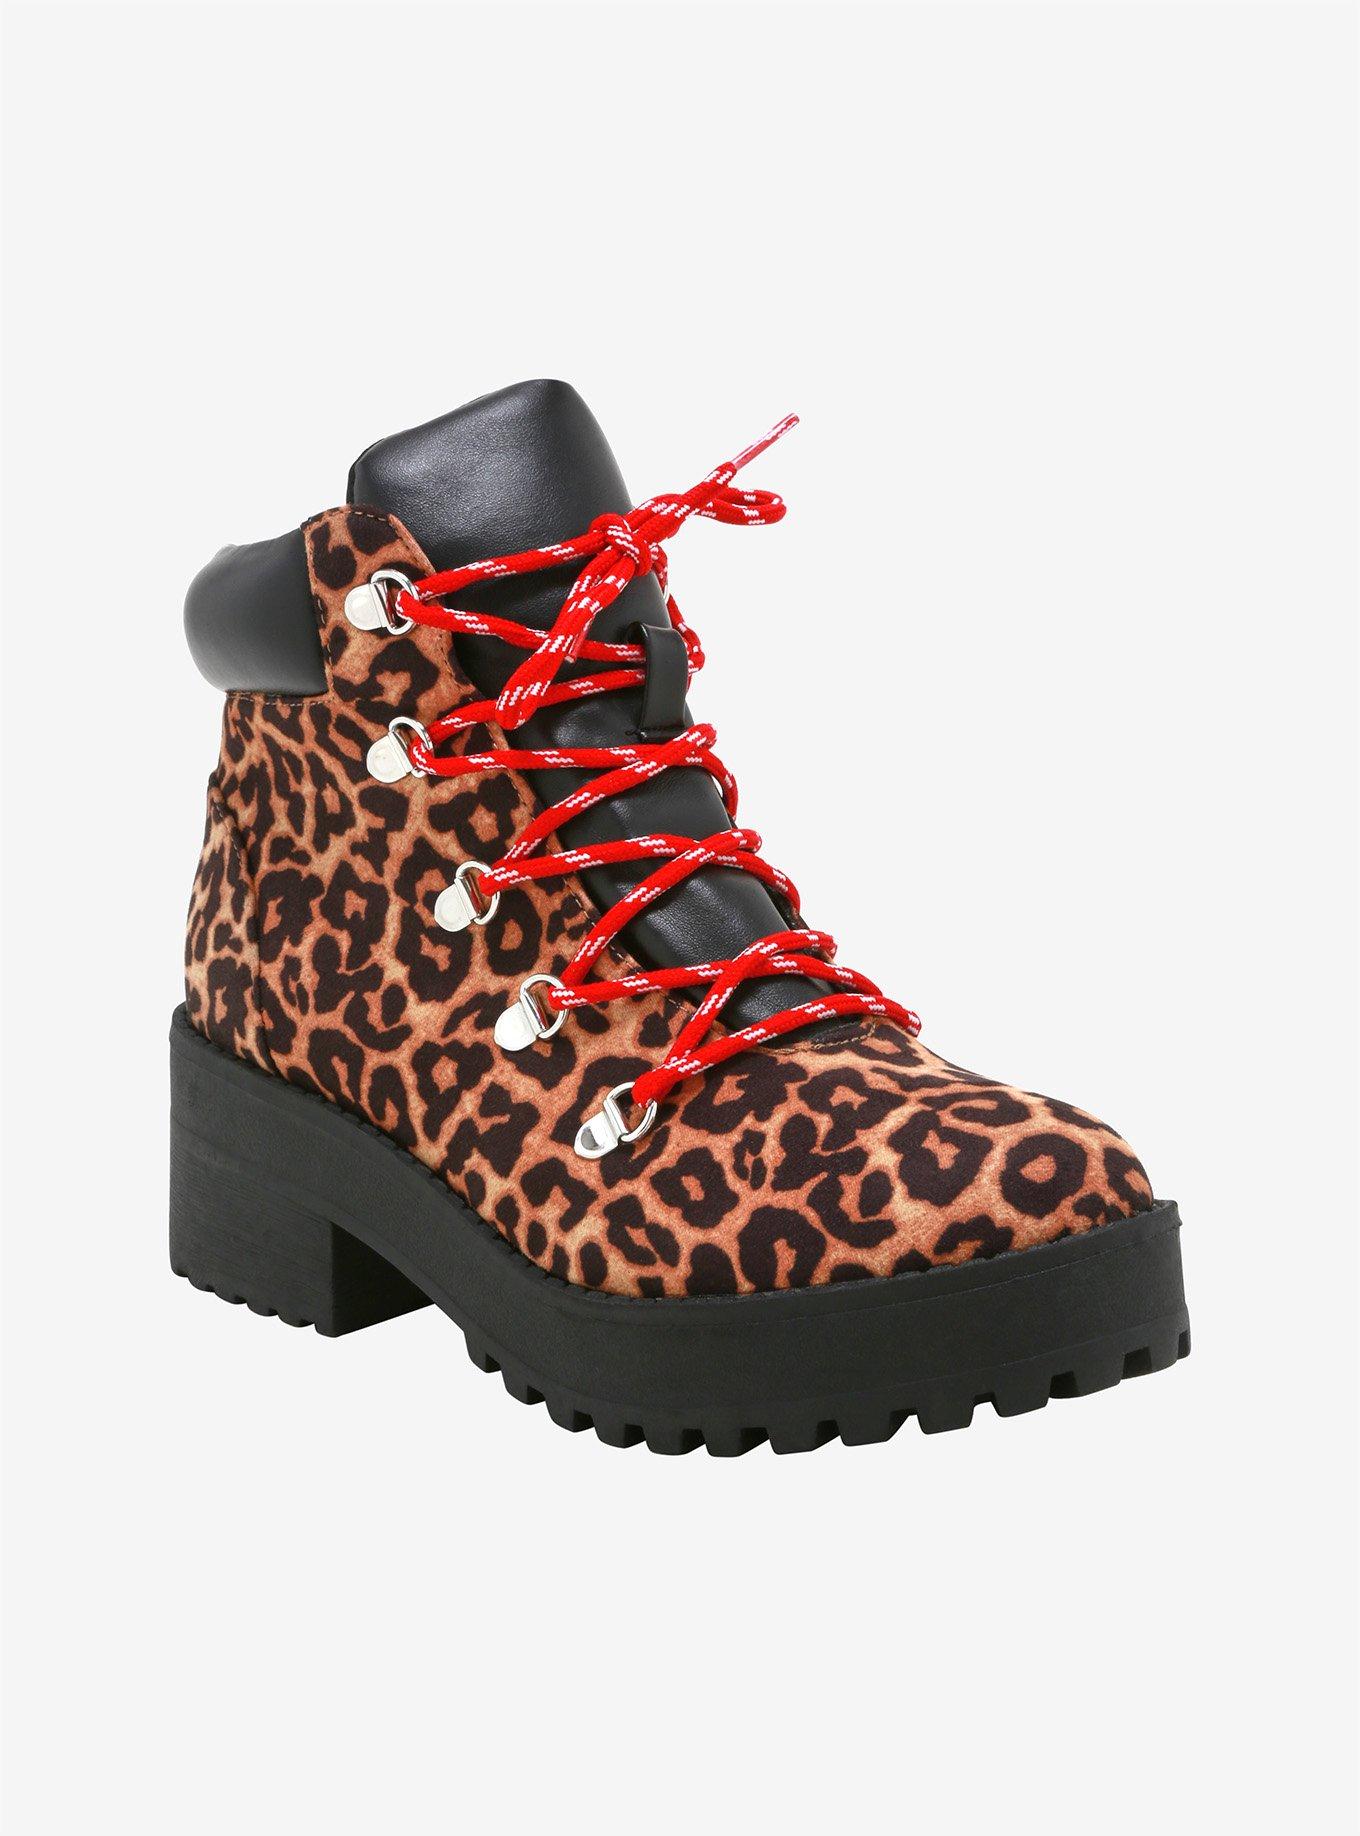 Wild N Out Leopard Print Boots, MULTI, hi-res